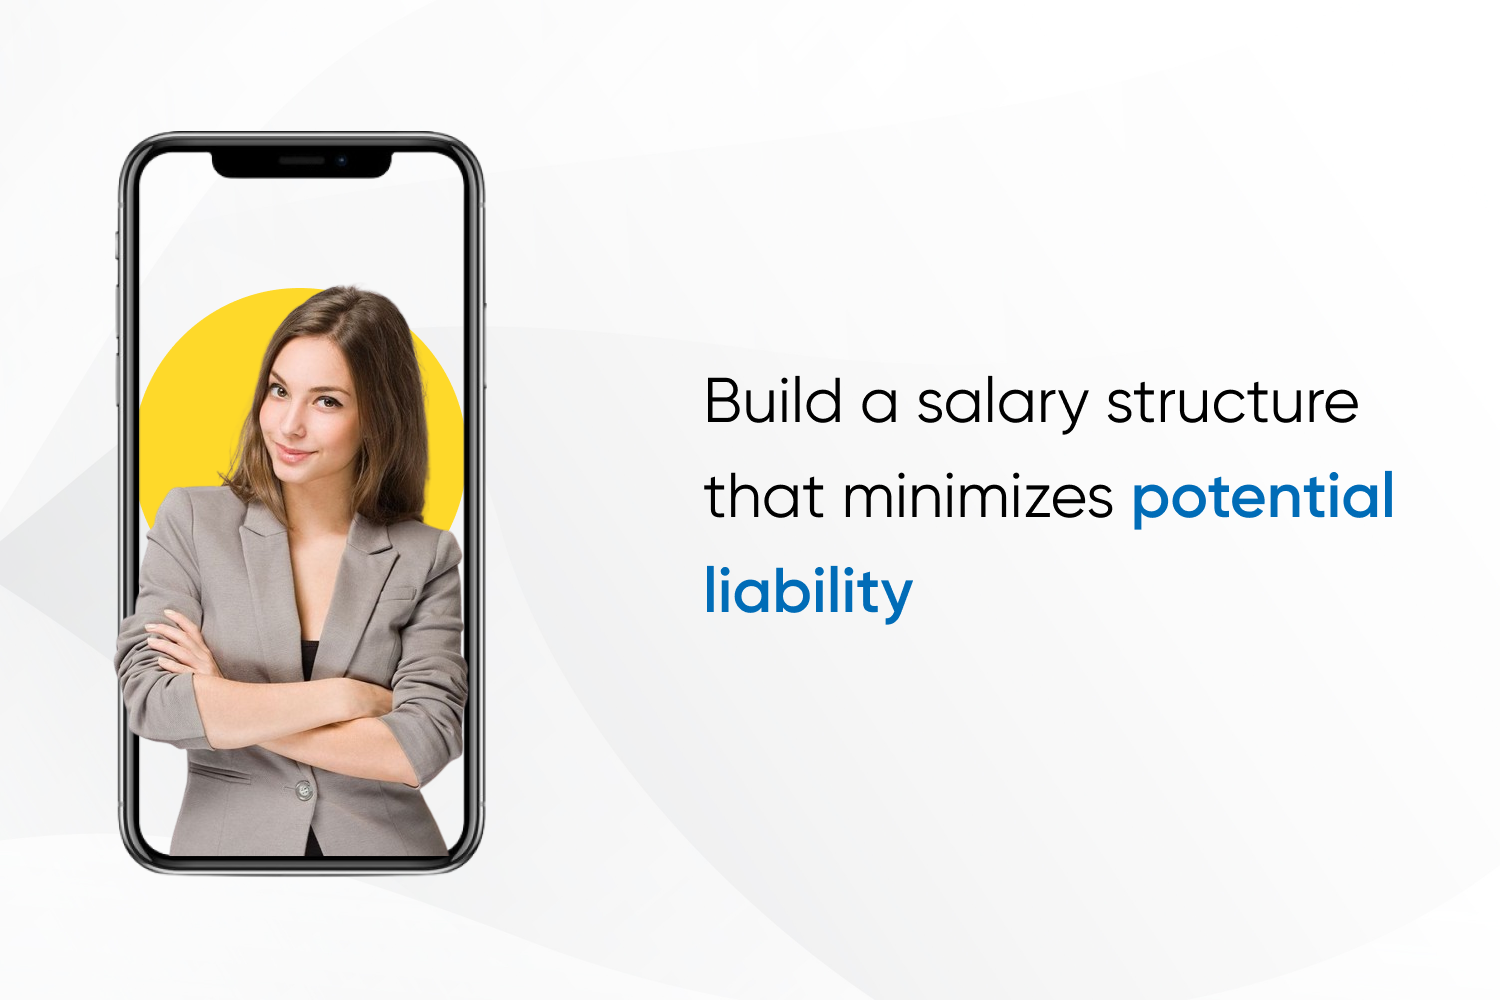 Build a salary structure that minimizes potential liability